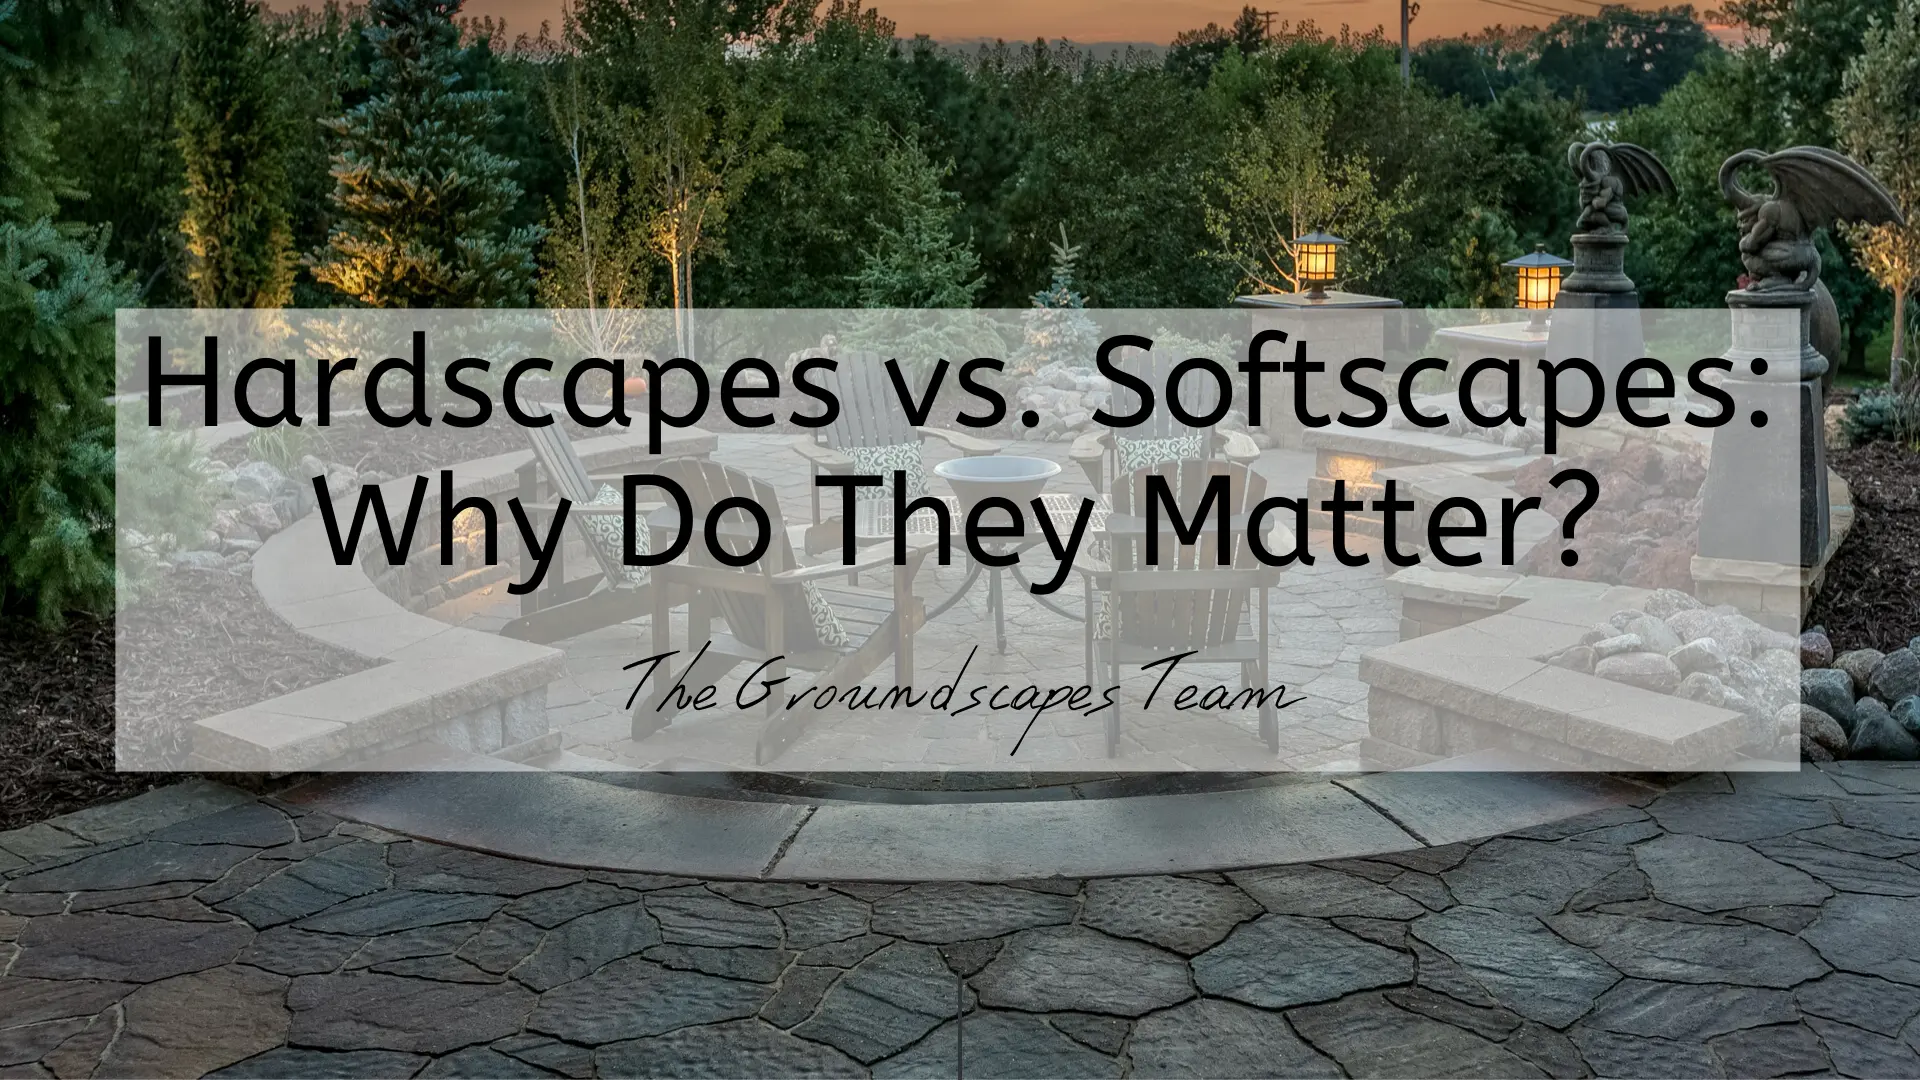 Hardscapes vs. Softscapes: Why Do They Matter?